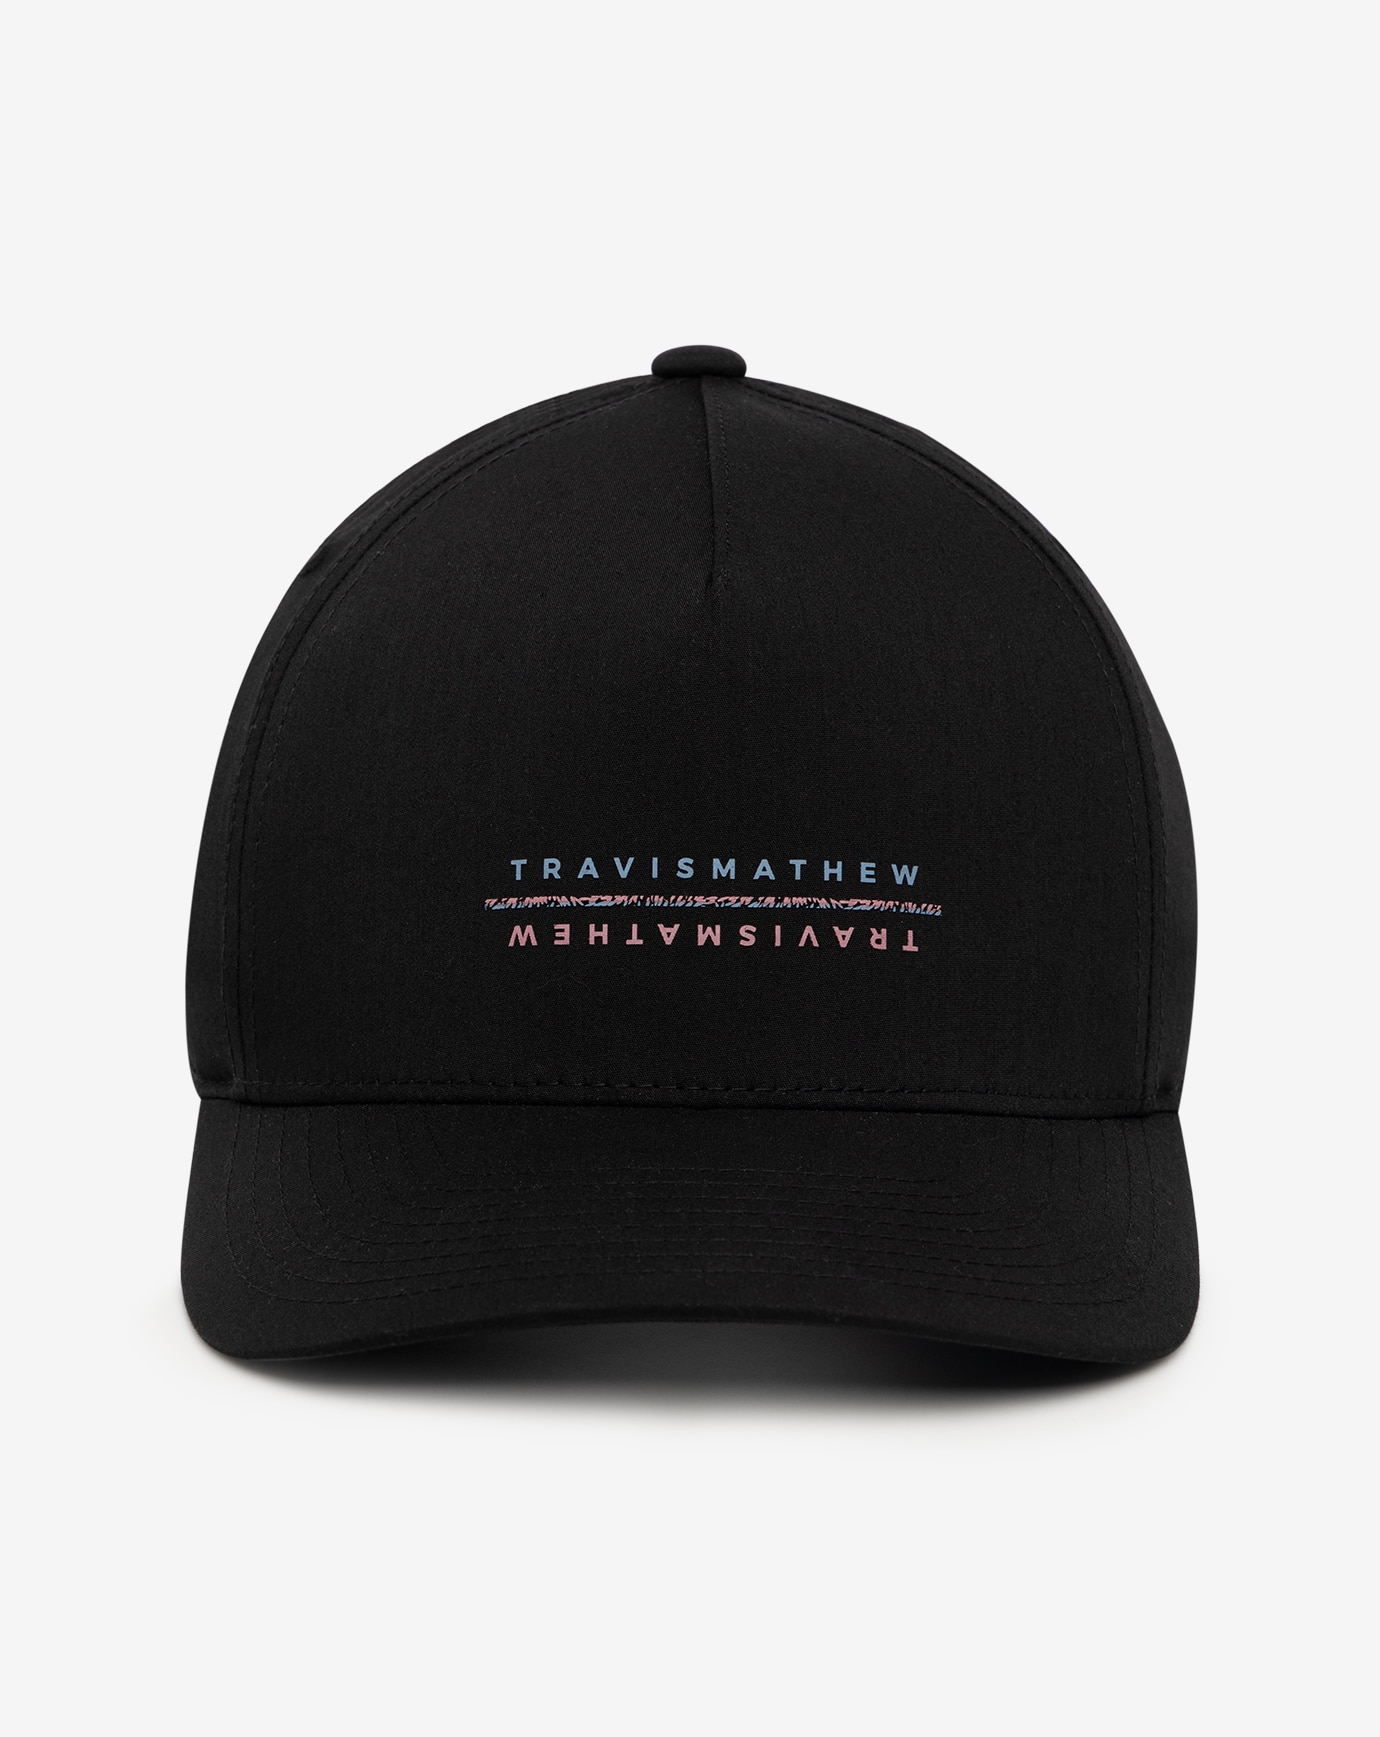 NIGHT ON THE TOWN SNAPBACK HAT Image Thumbnail 1